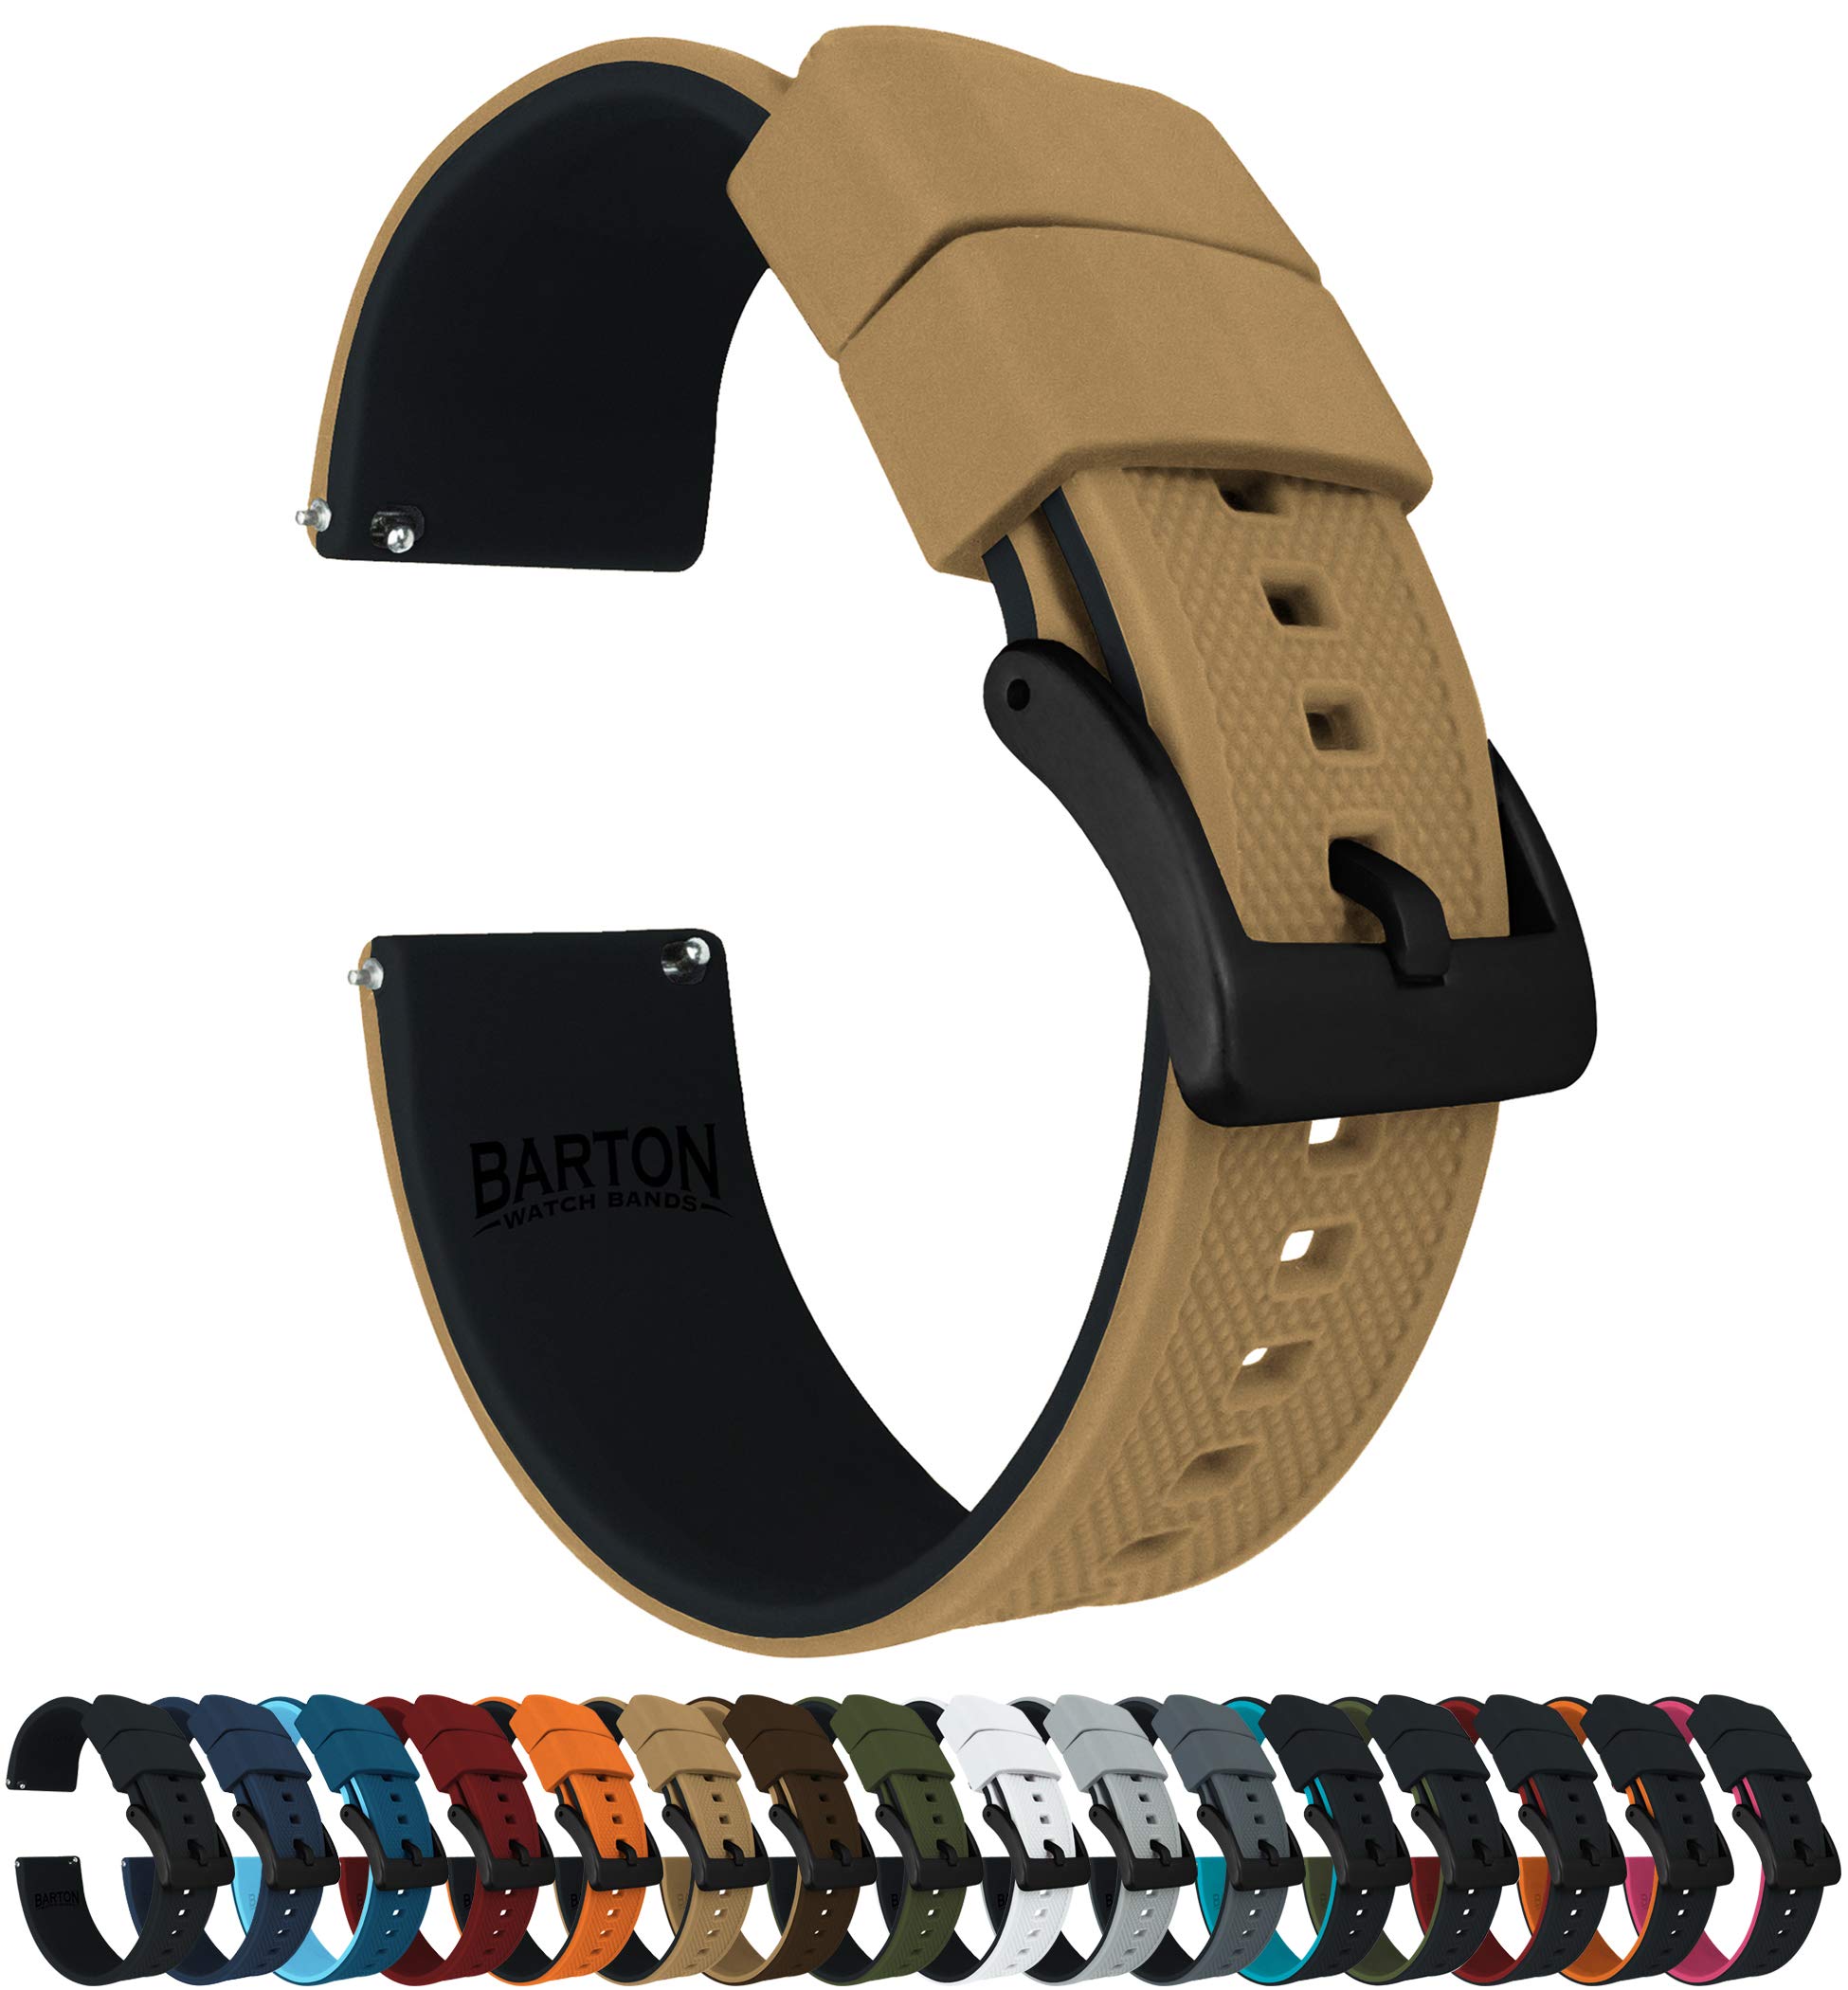 BARTON Elite Silicone Watch Bands - Quick Release - Choose Strap Color & Buckle Color (Stainless Steel, Black PVD or Gunmetal Grey) - 18mm, 19mm, 20mm, 21mm, 22mm, 23mm & 24mm Watch Straps